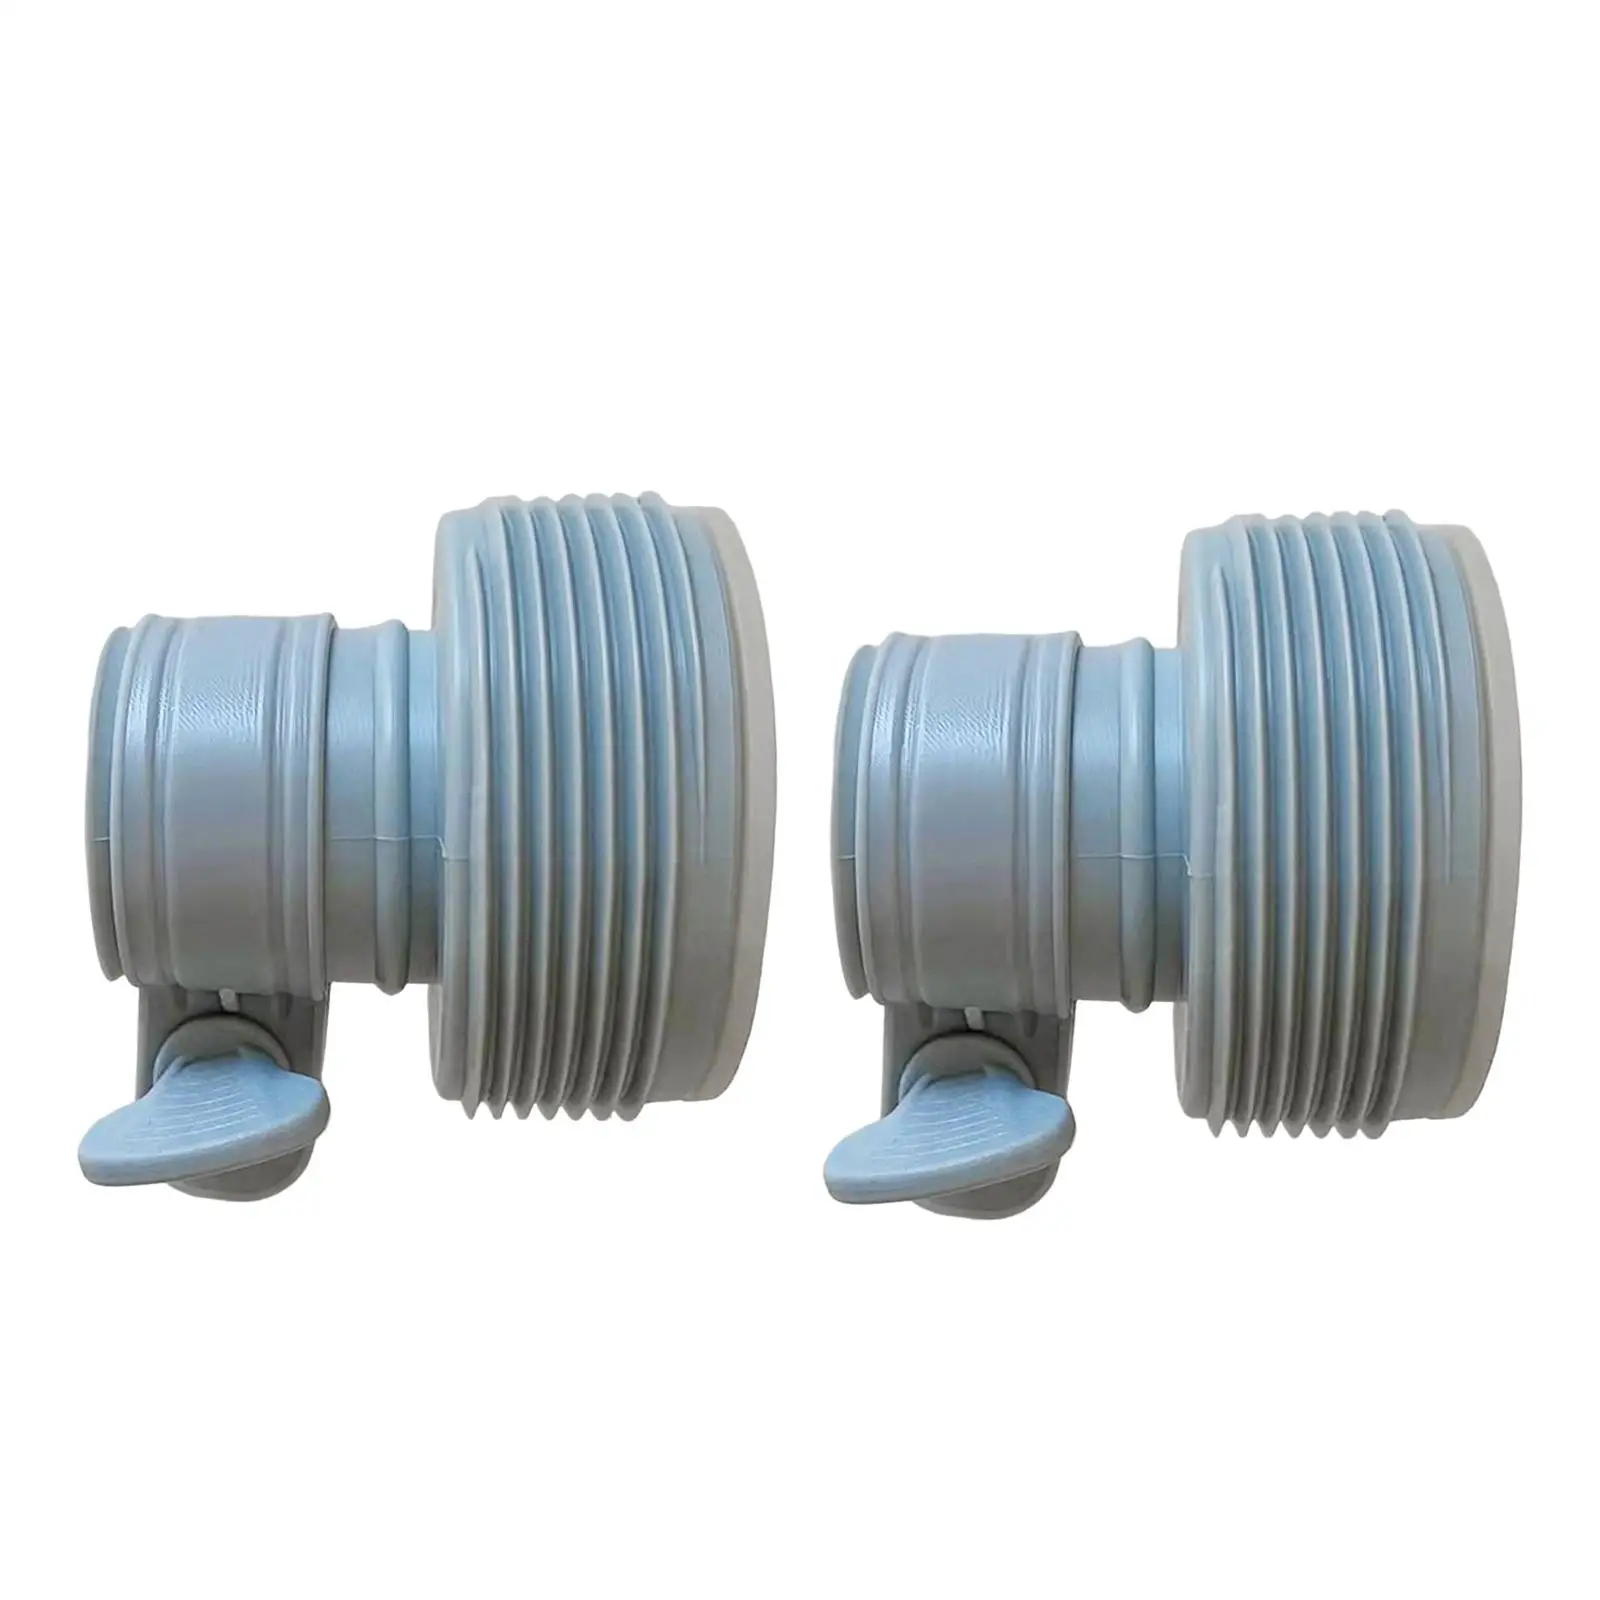 Hose Conversion Adapter B 1 Pair 1.25 Inches to 1.5 Inches Conversion Kit for Saltwater System